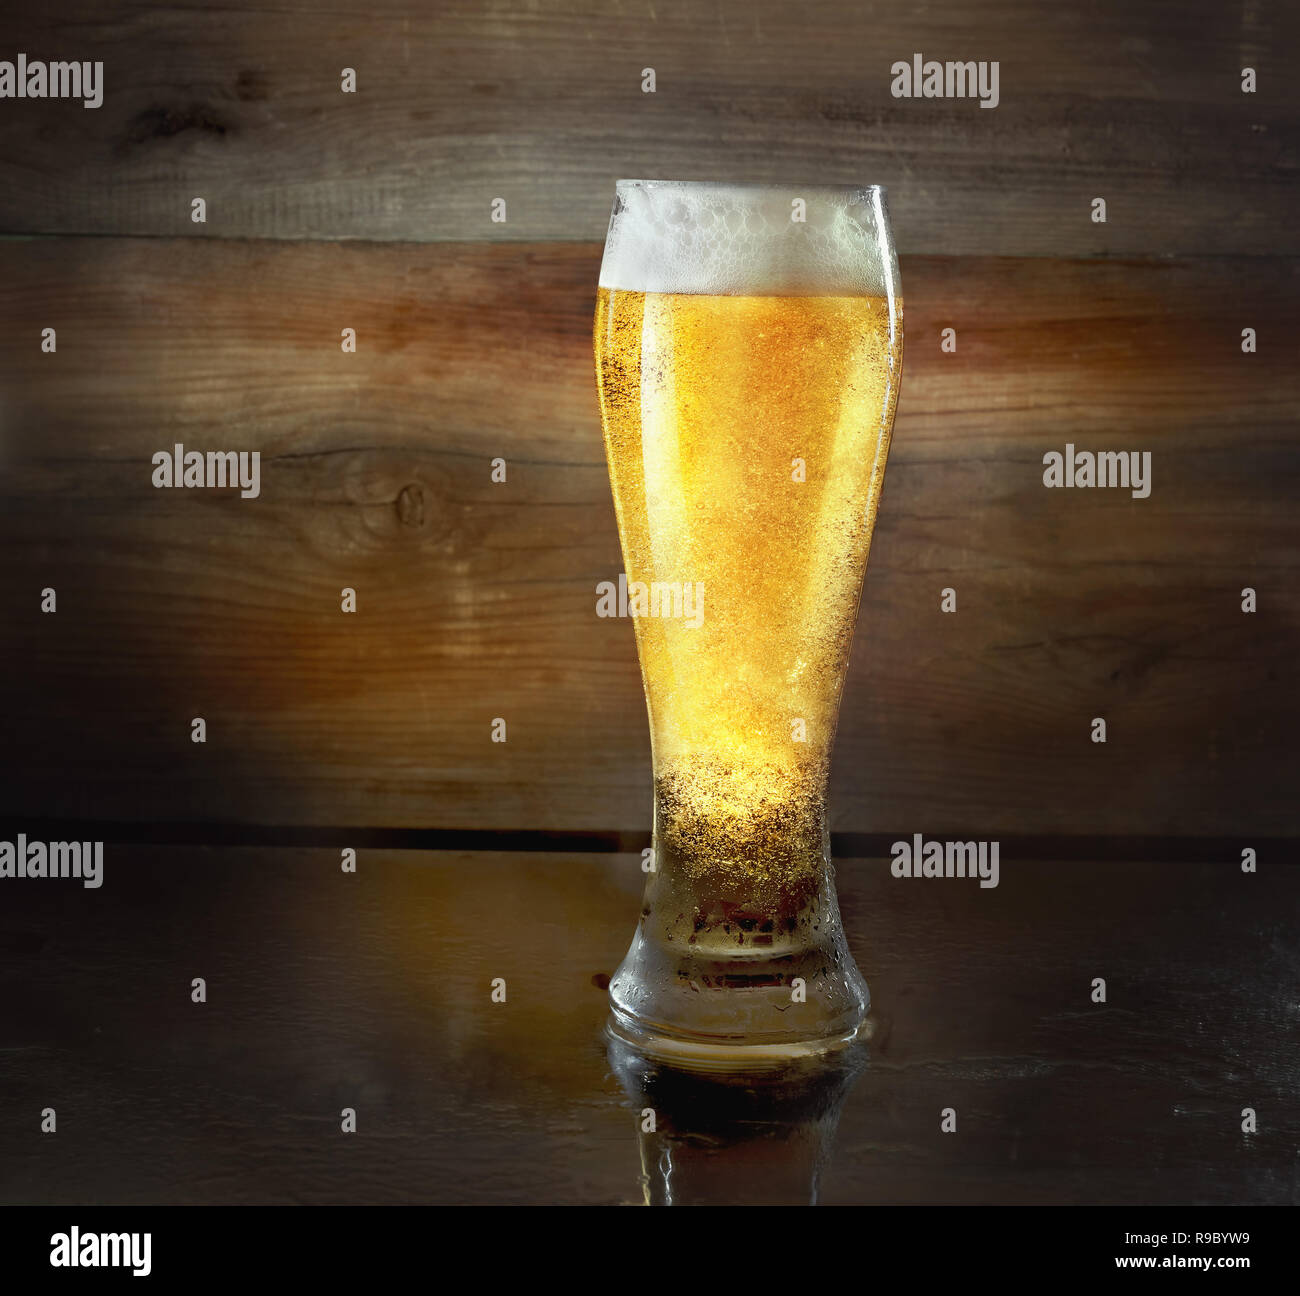 Beer glass on old wooden background Stock Photo